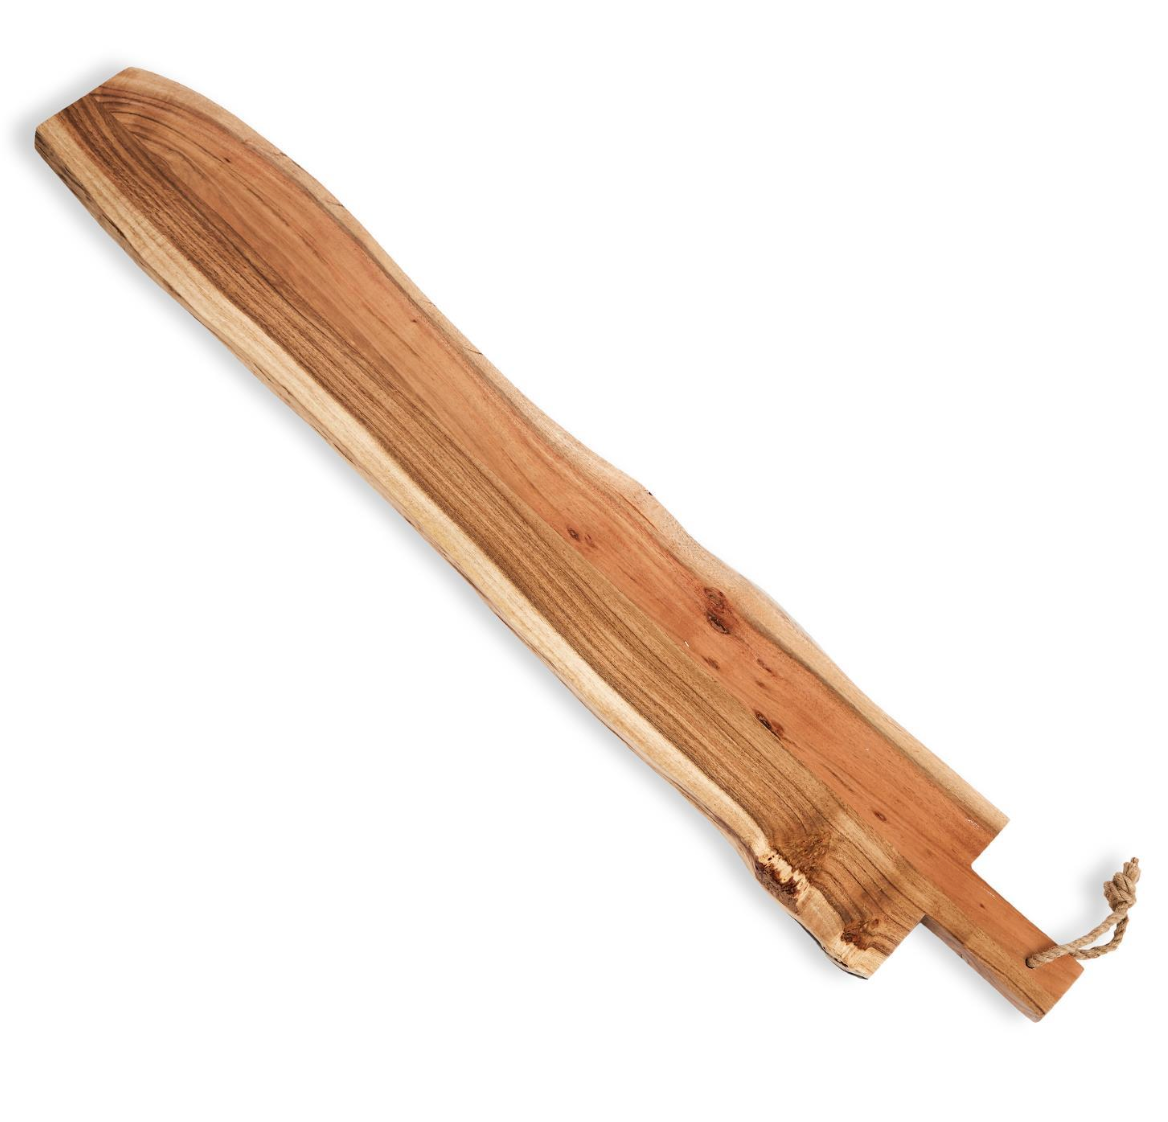 Extra Long ( 54") Raw Edge Wood Serving Board